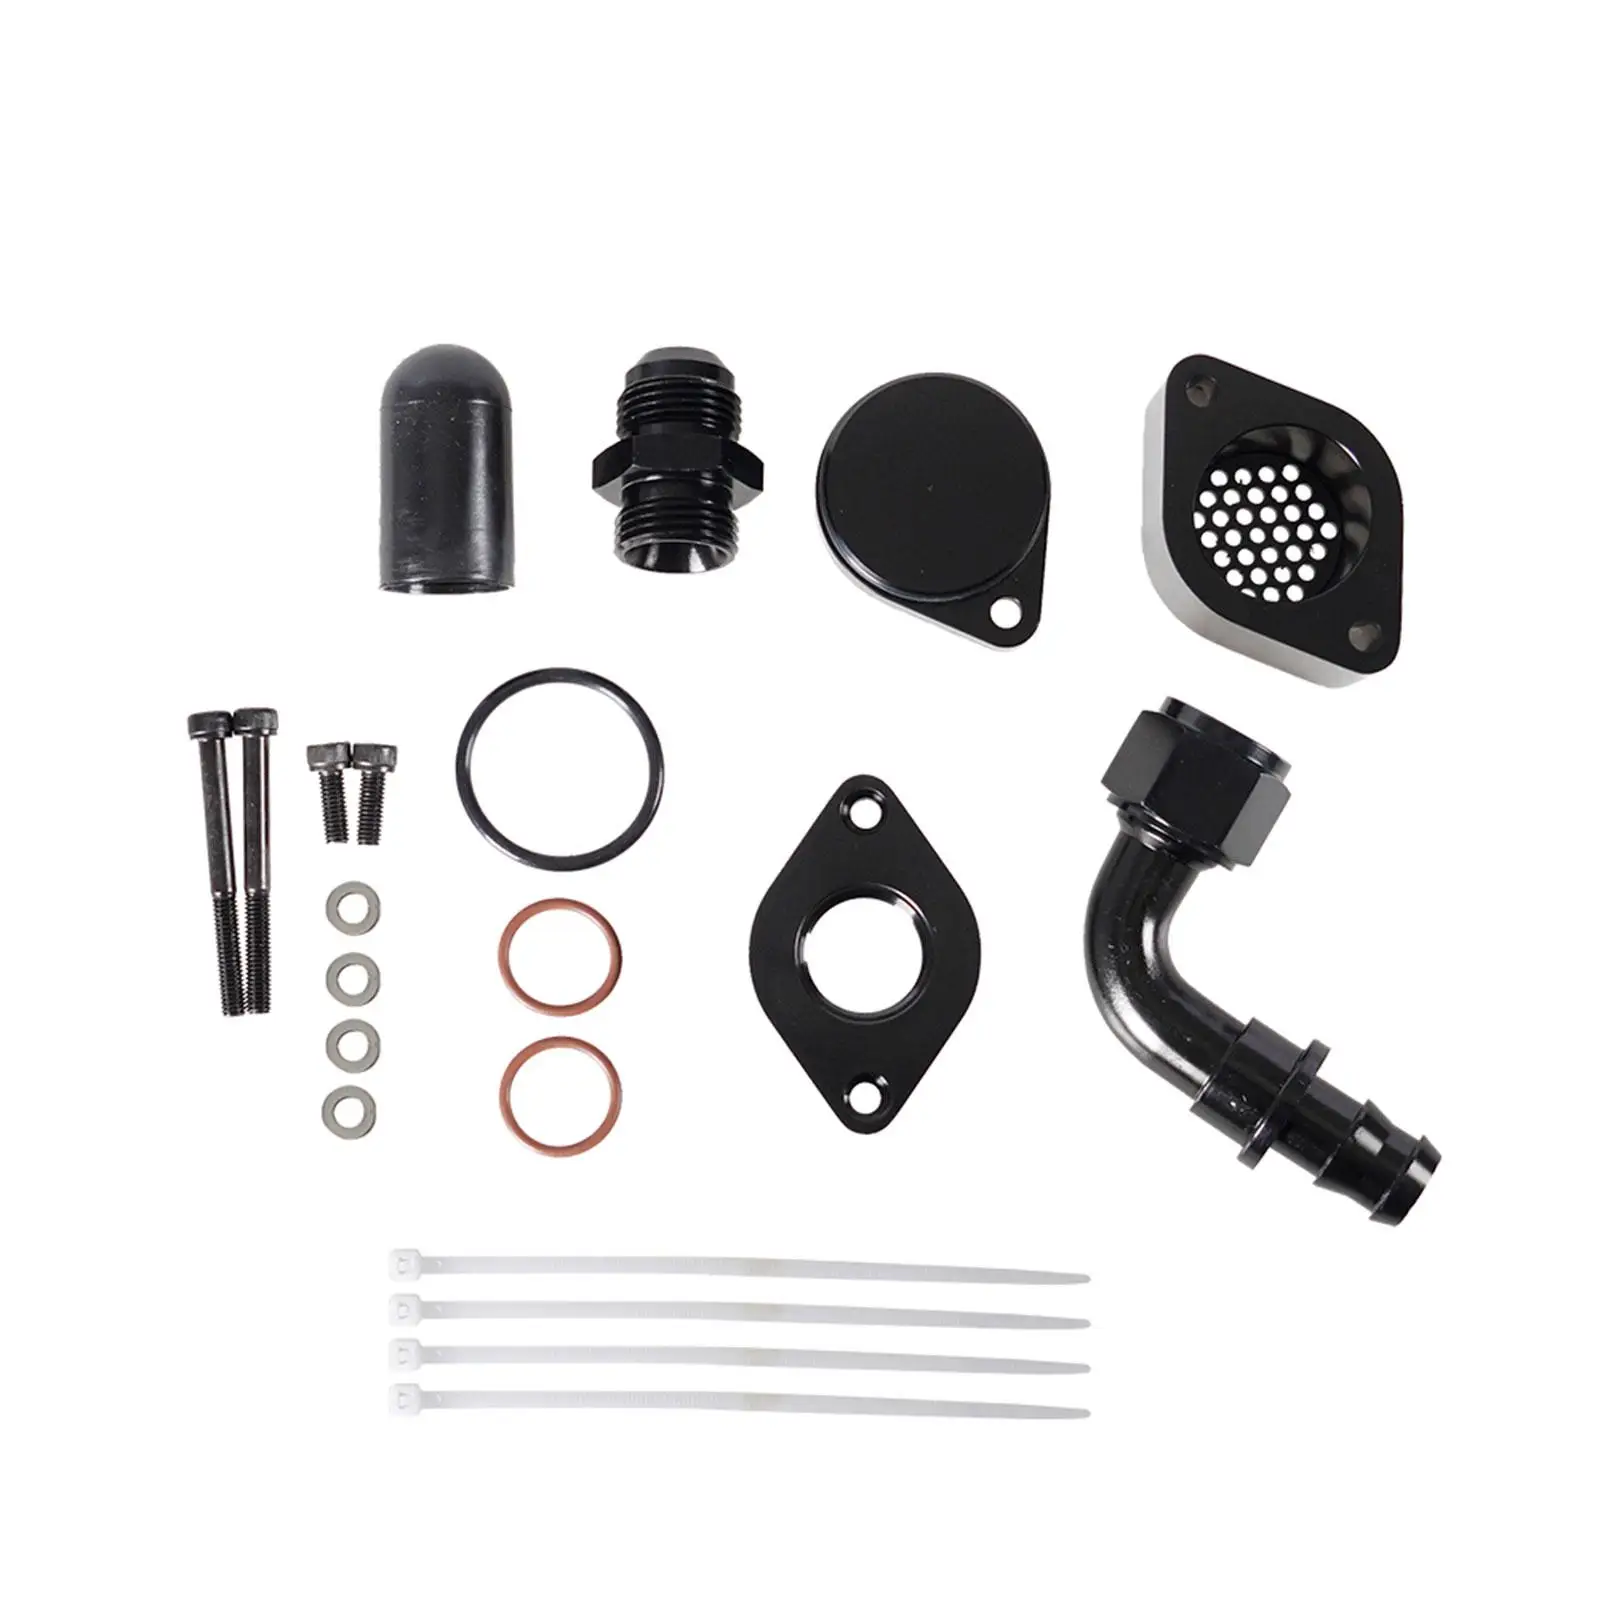 Engine Ventilation Set High Quality Accessories Metal Durable for Ford 11-20 6.7L Powerstroke Diesel F-550 F-450 F750 F650